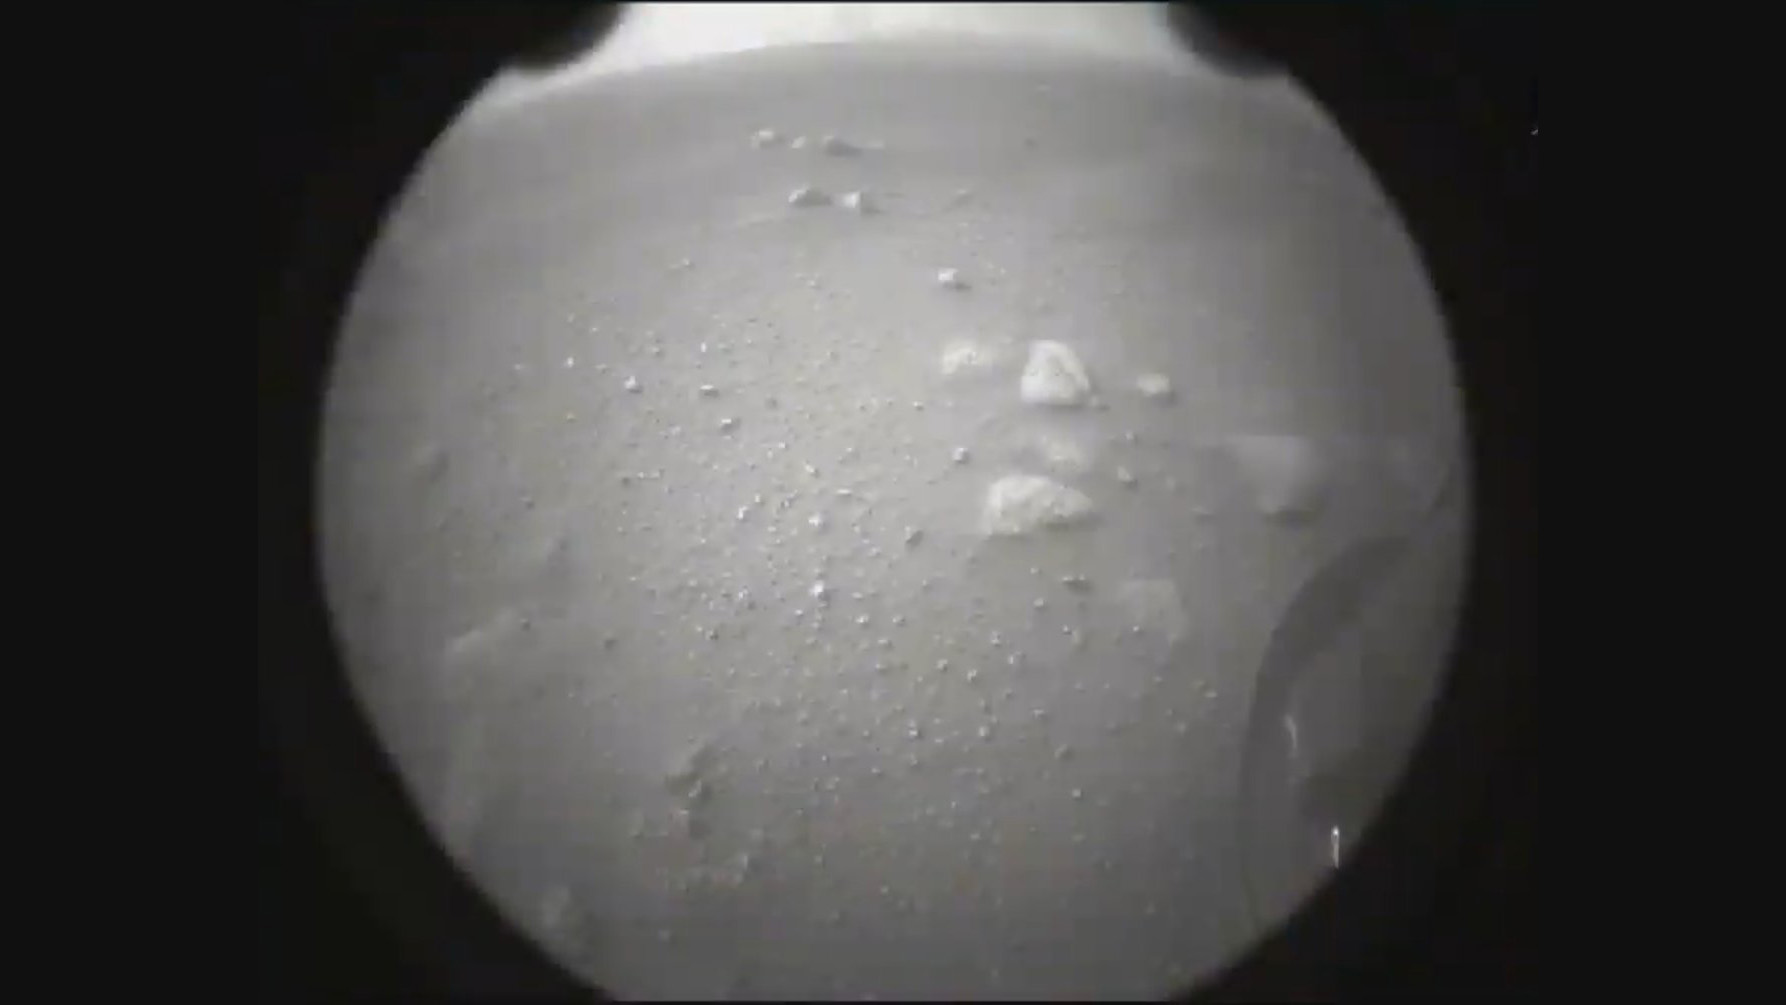 A second image from the Perseverance rover taken just after landing shows the view from the rear of the spacecraft.